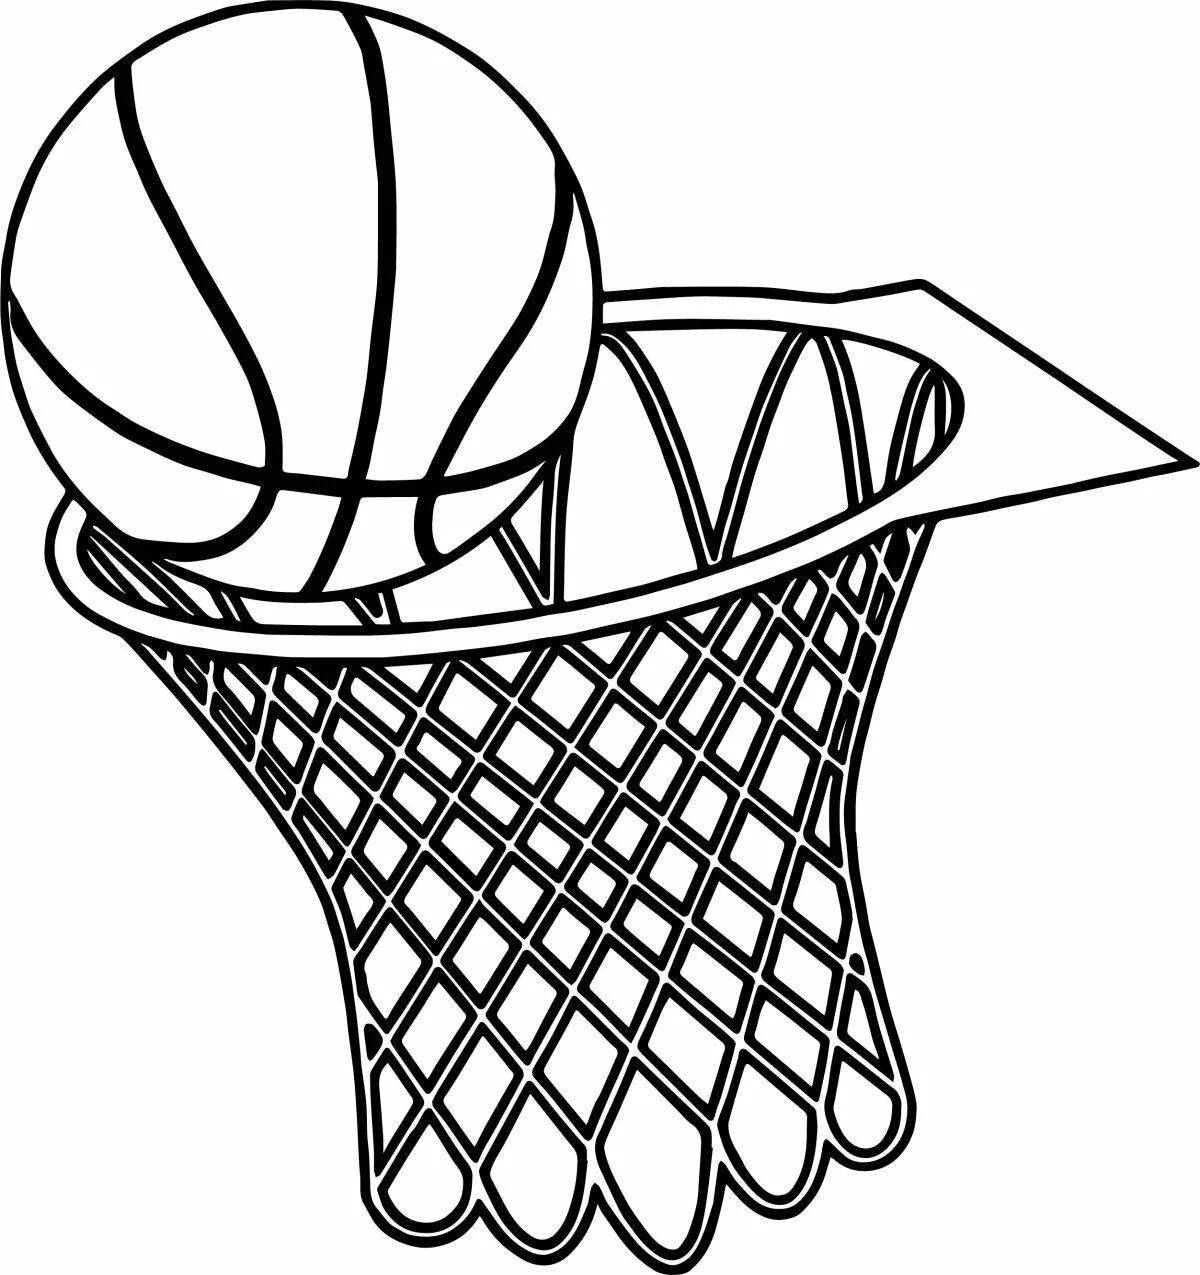 Dynamic sports equipment coloring page